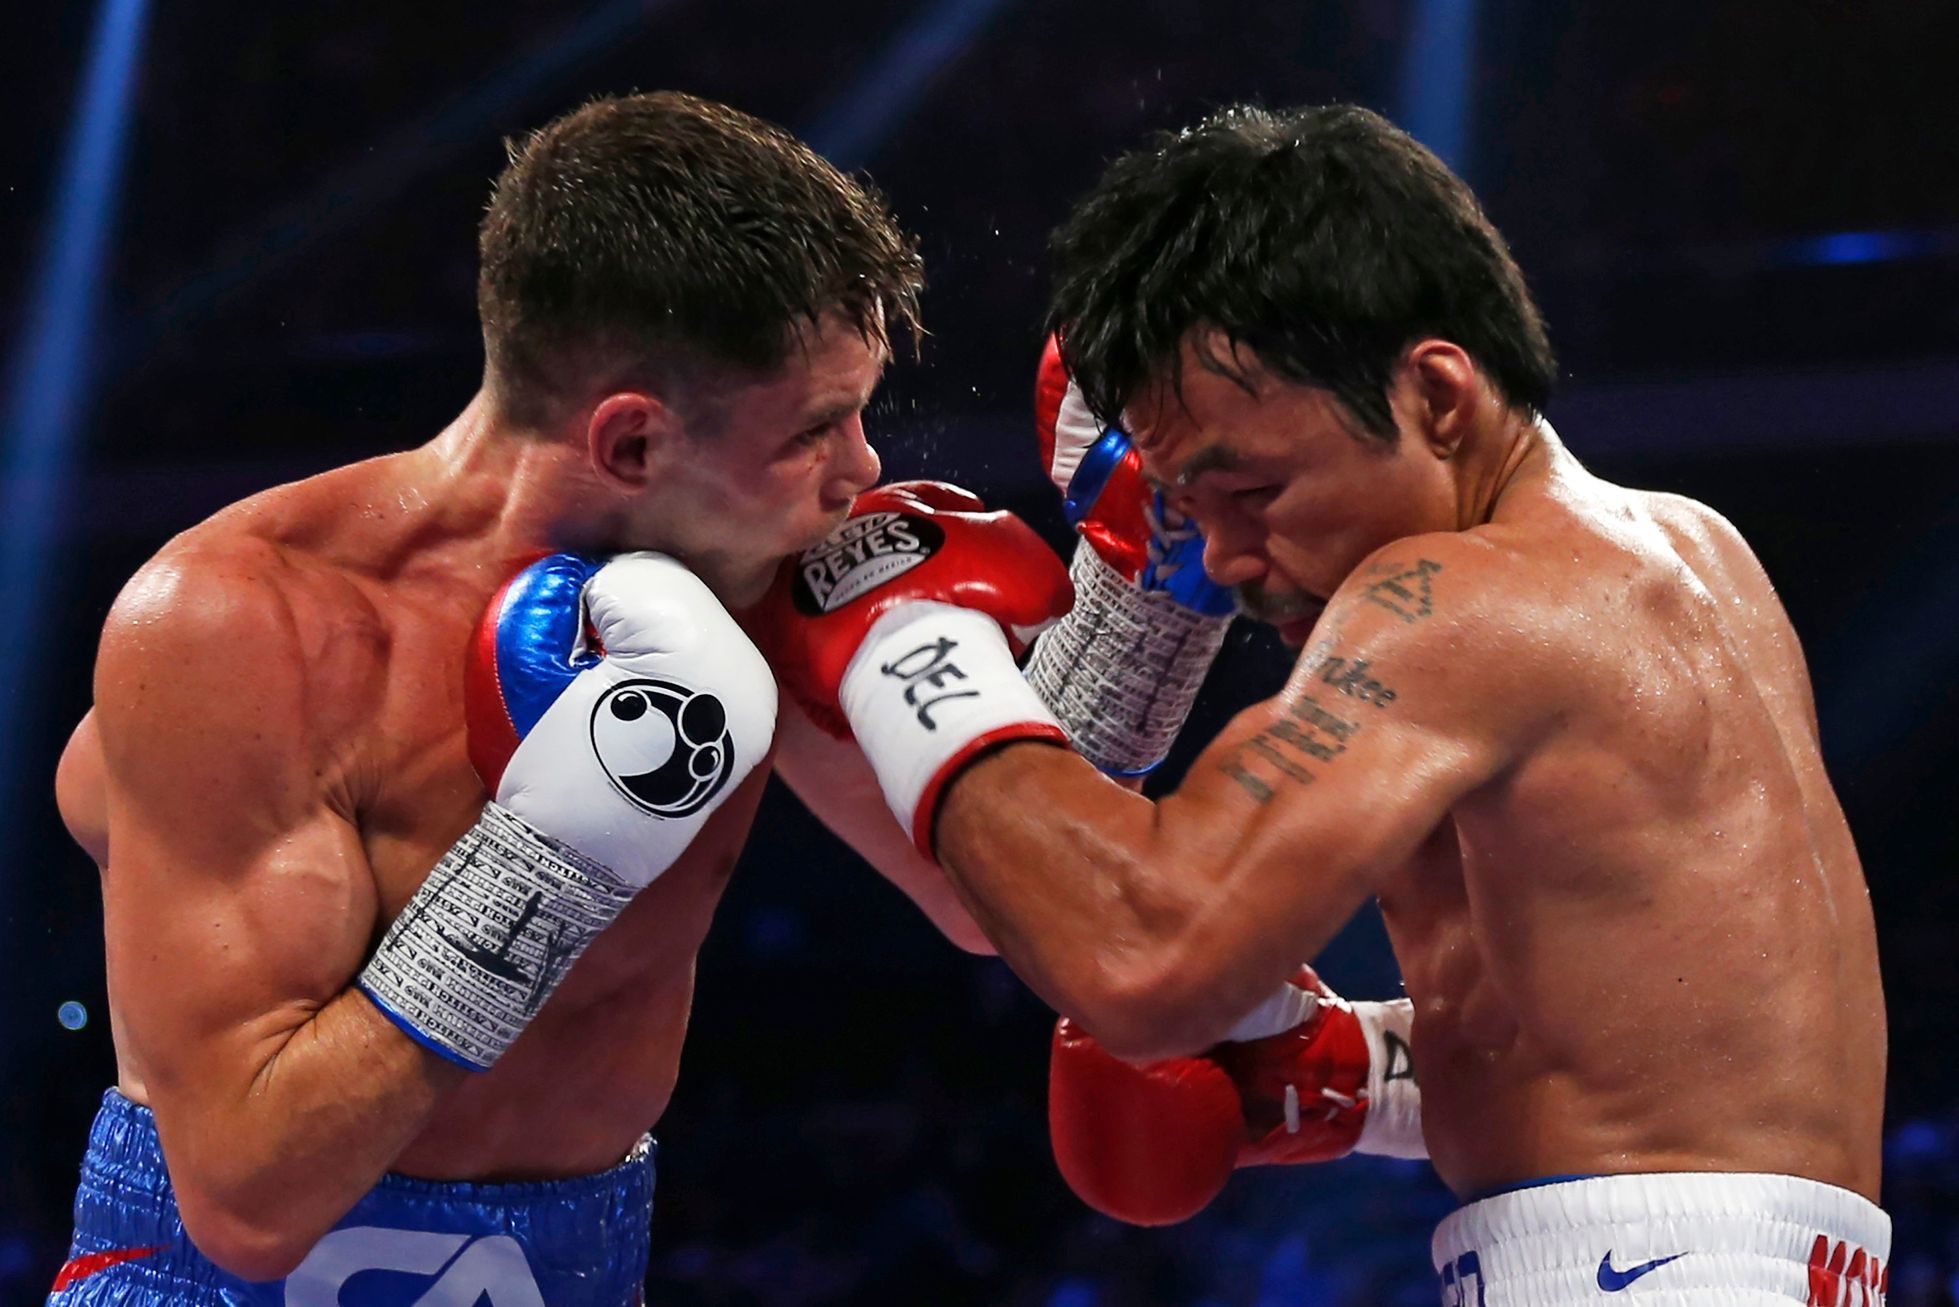 Pacquiao of the Philippines punches Algieri of the U.S. during their WBO 12-round welterweight title fight at the Venetian Macao hotel in Macau